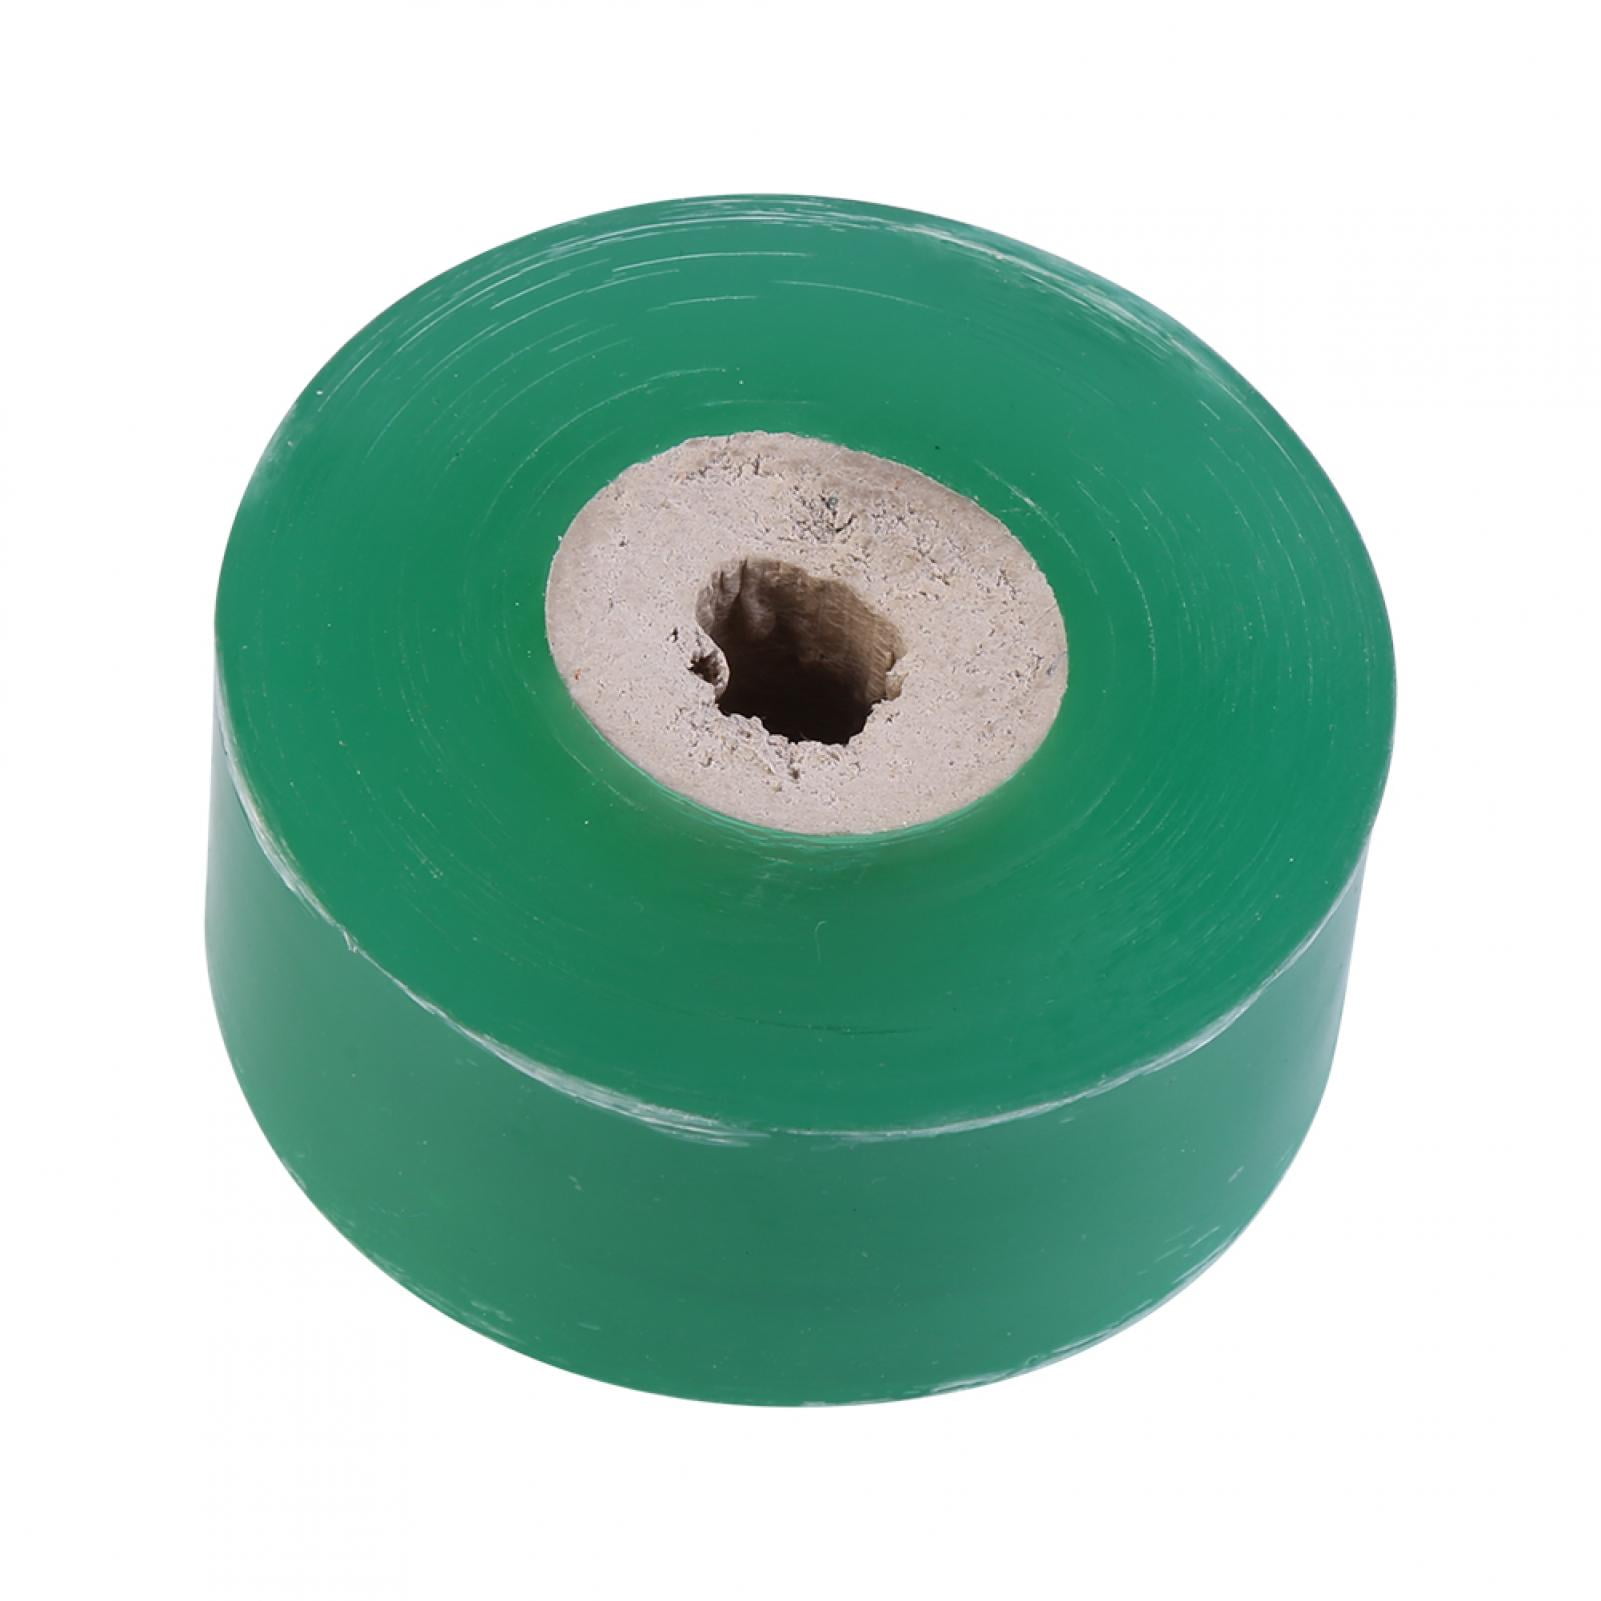 100M Nursery Grafting Tape Stretchable Self-adhesive For Garden Tree Seedling 